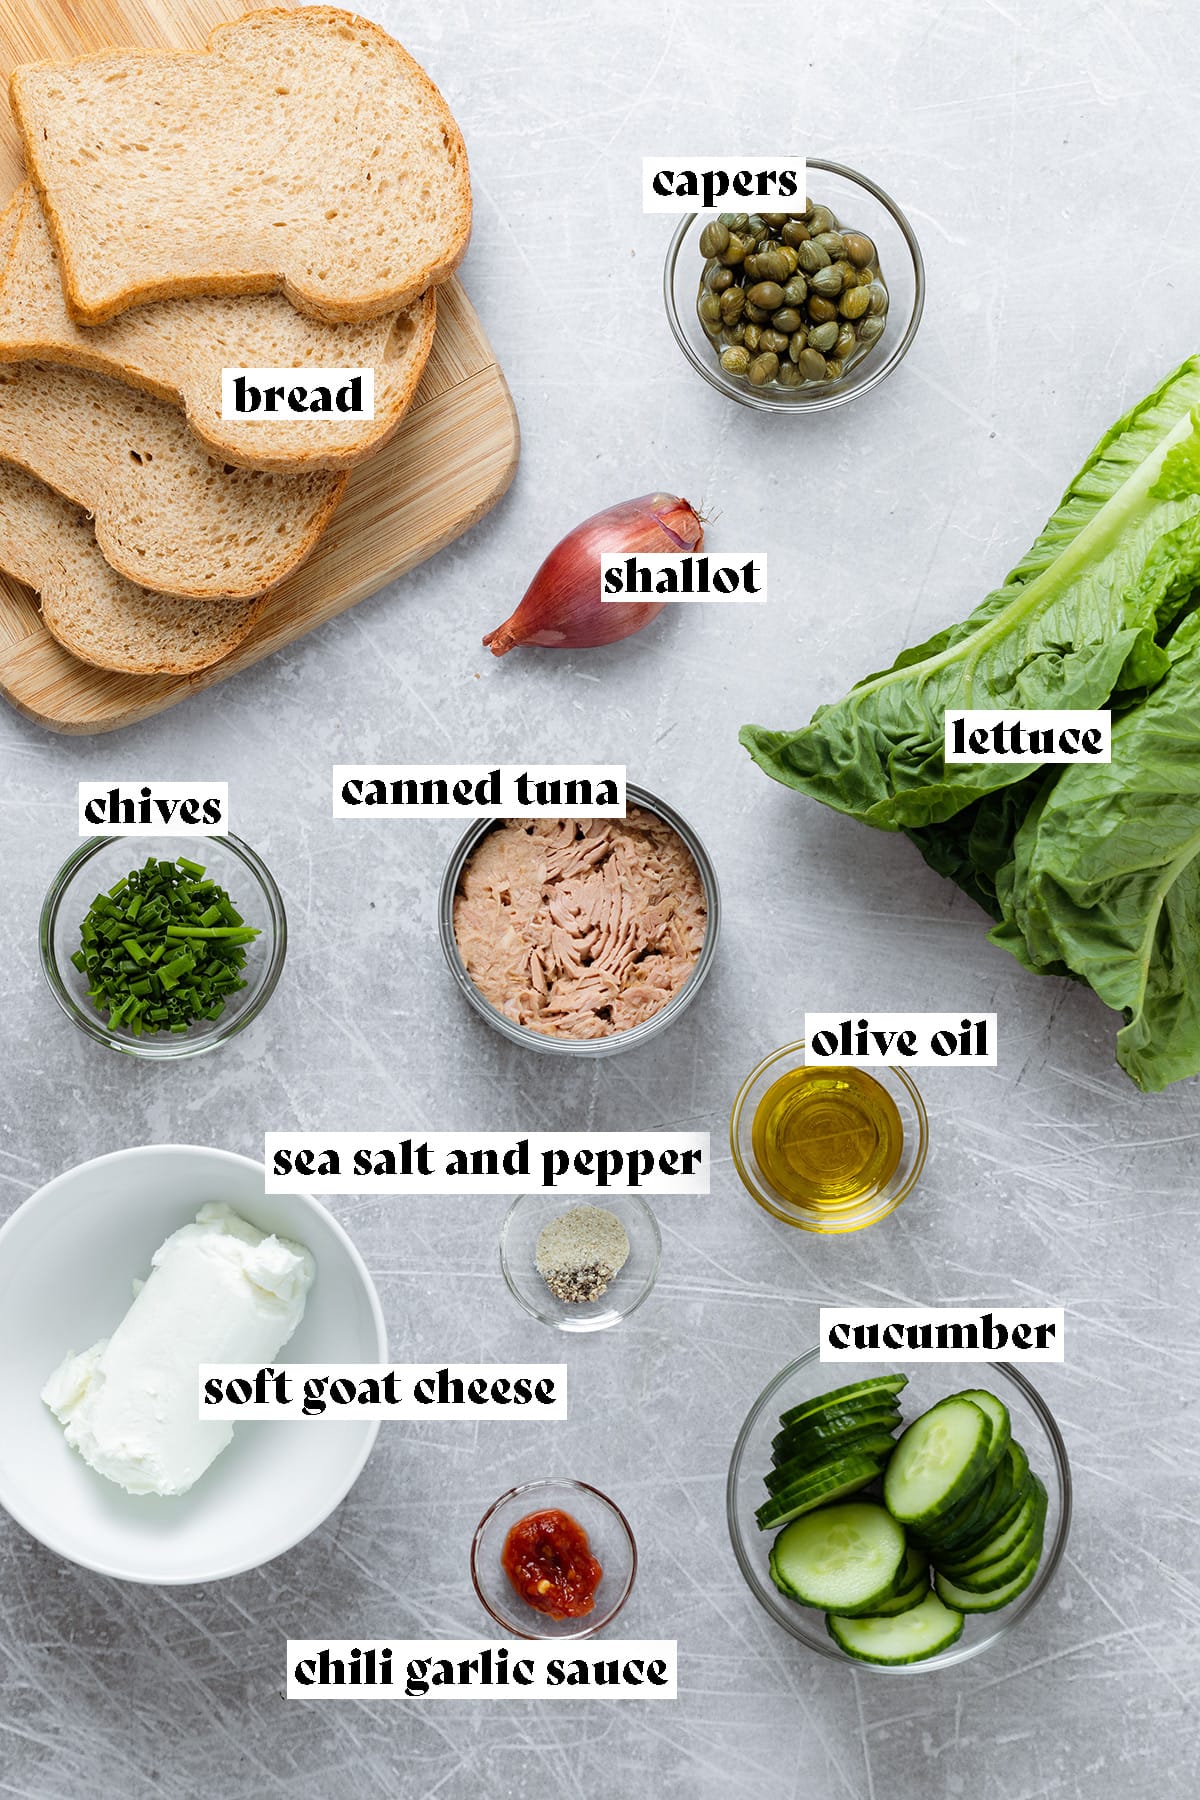 Ingredients for tuna sandwich like bread, canned tuna, and sliced cucumber laid out on a metal background.